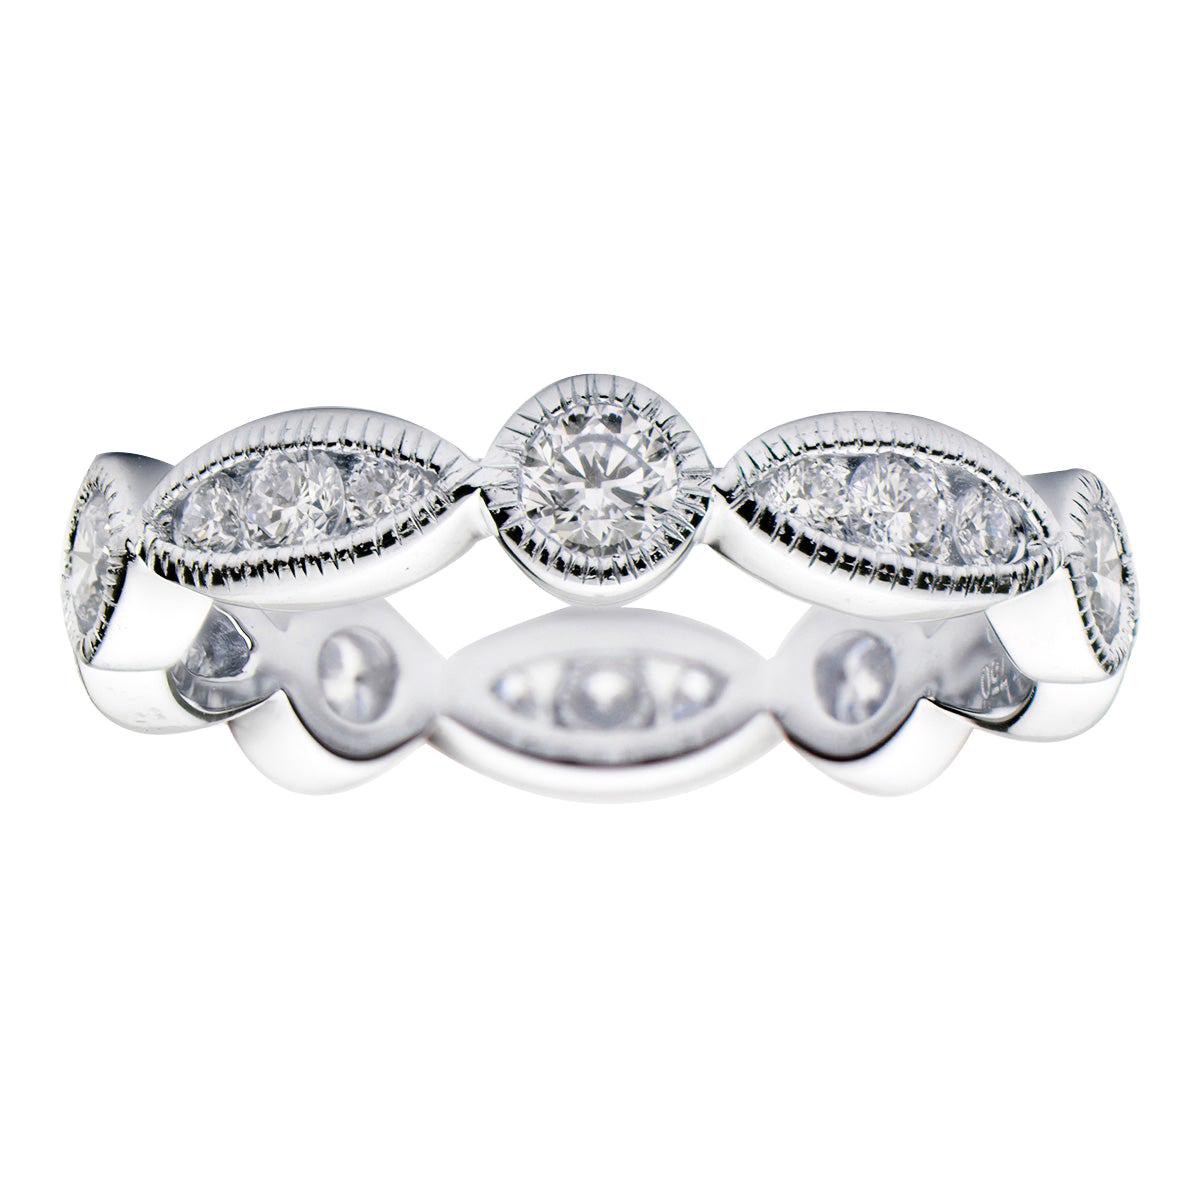 Round and Illusion Marquee Eternity Band